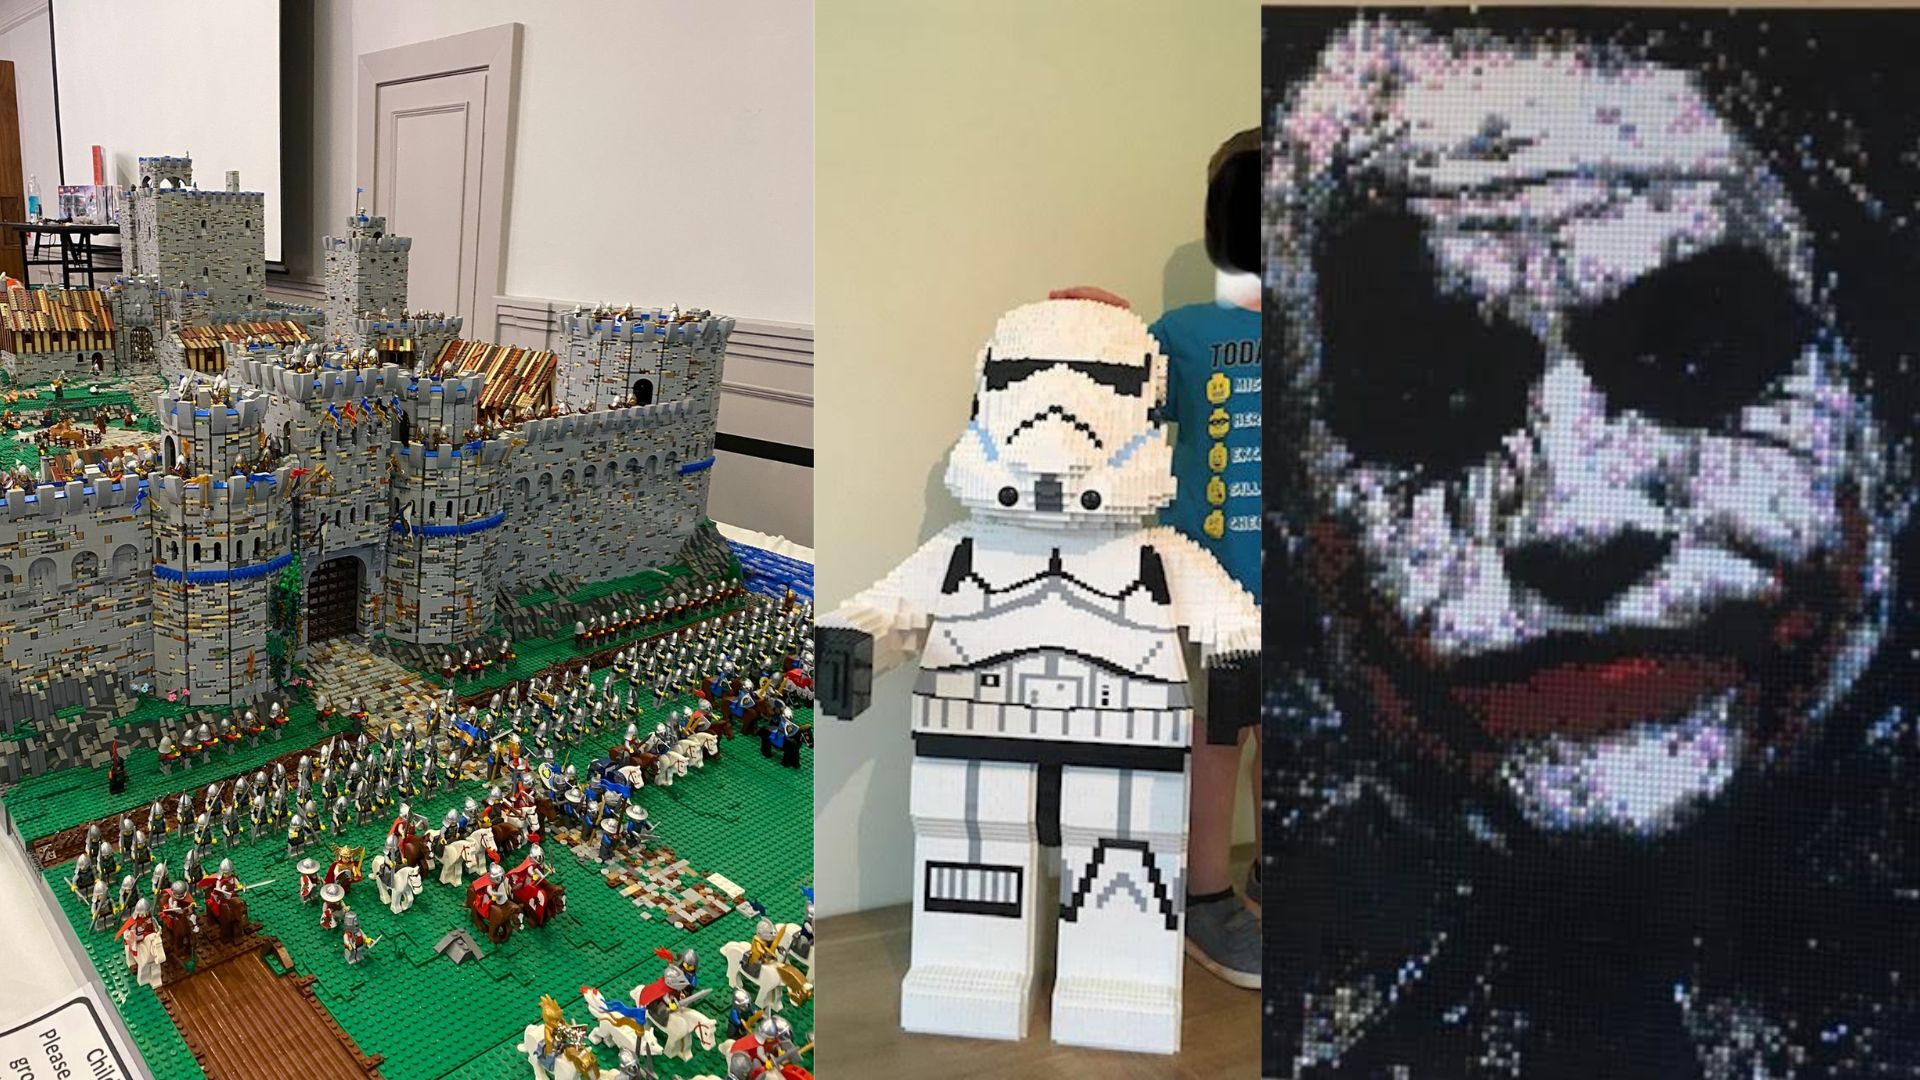 Limerick Lego Show will feature a range of impressive Lego-themed displays